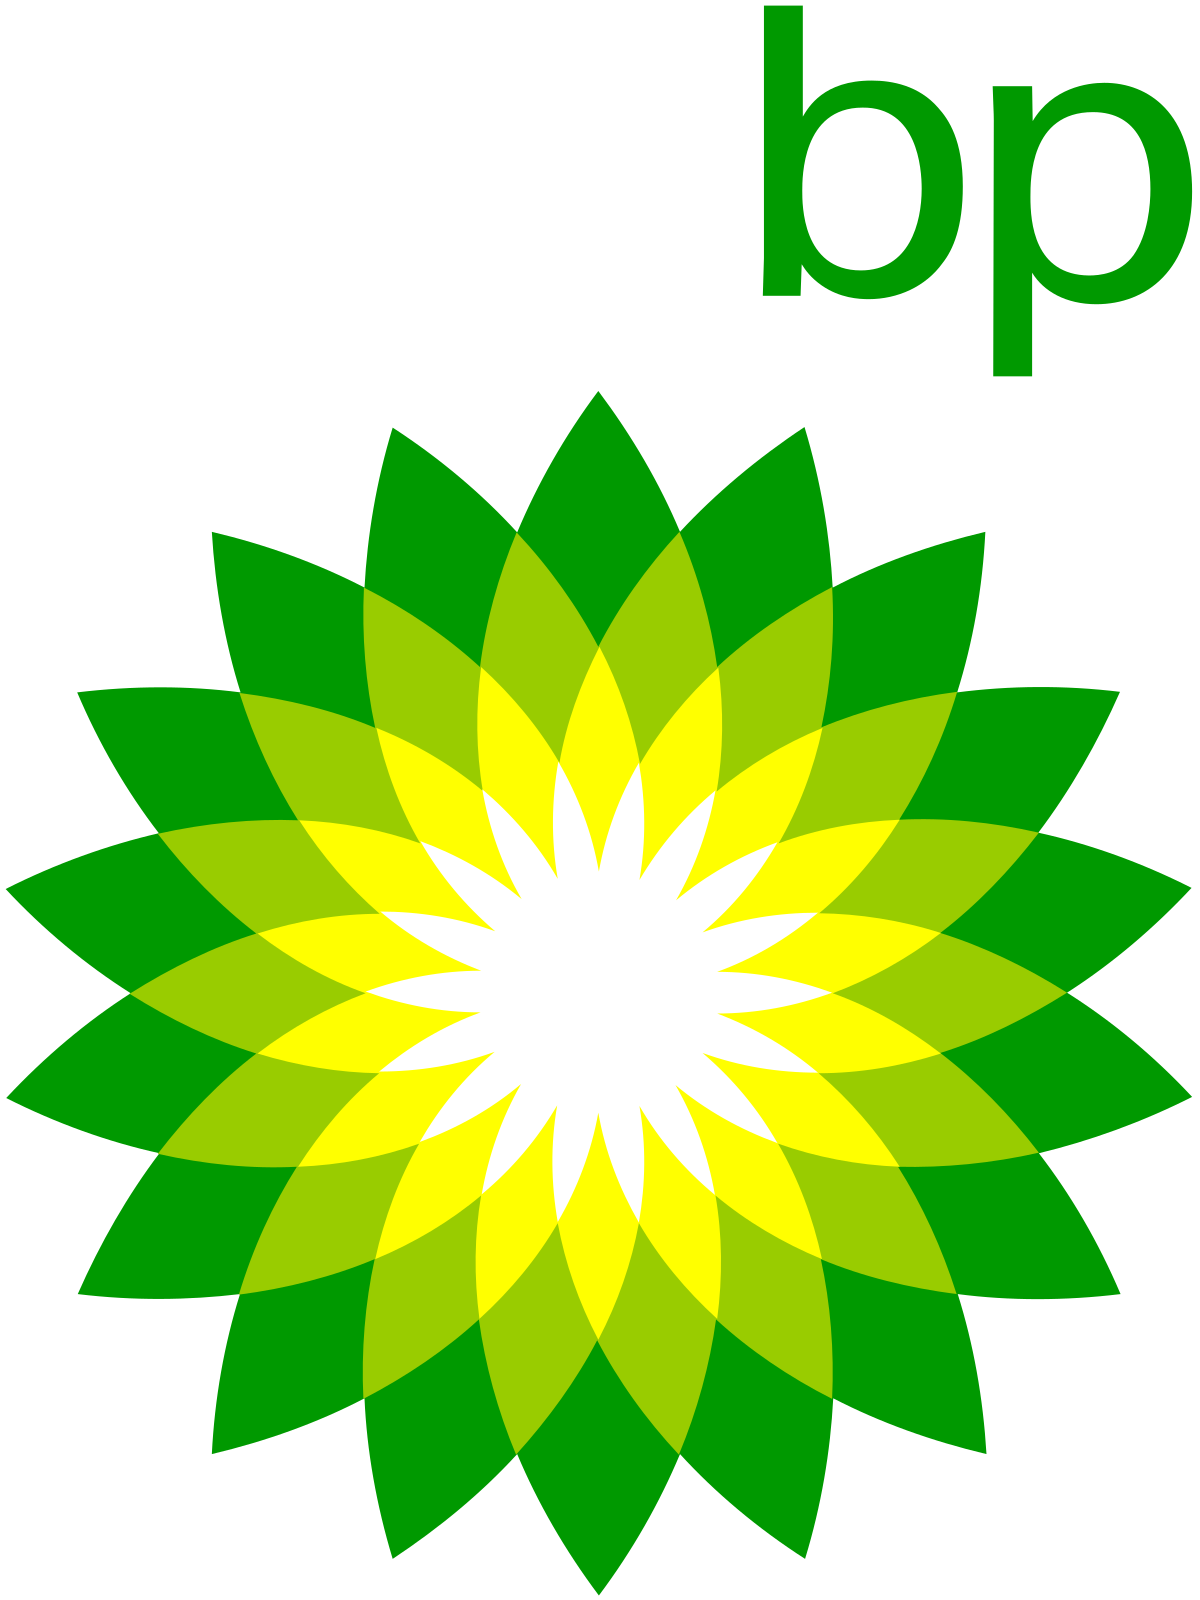 FOCUS-BP ventures back into oil frontiers to boost output